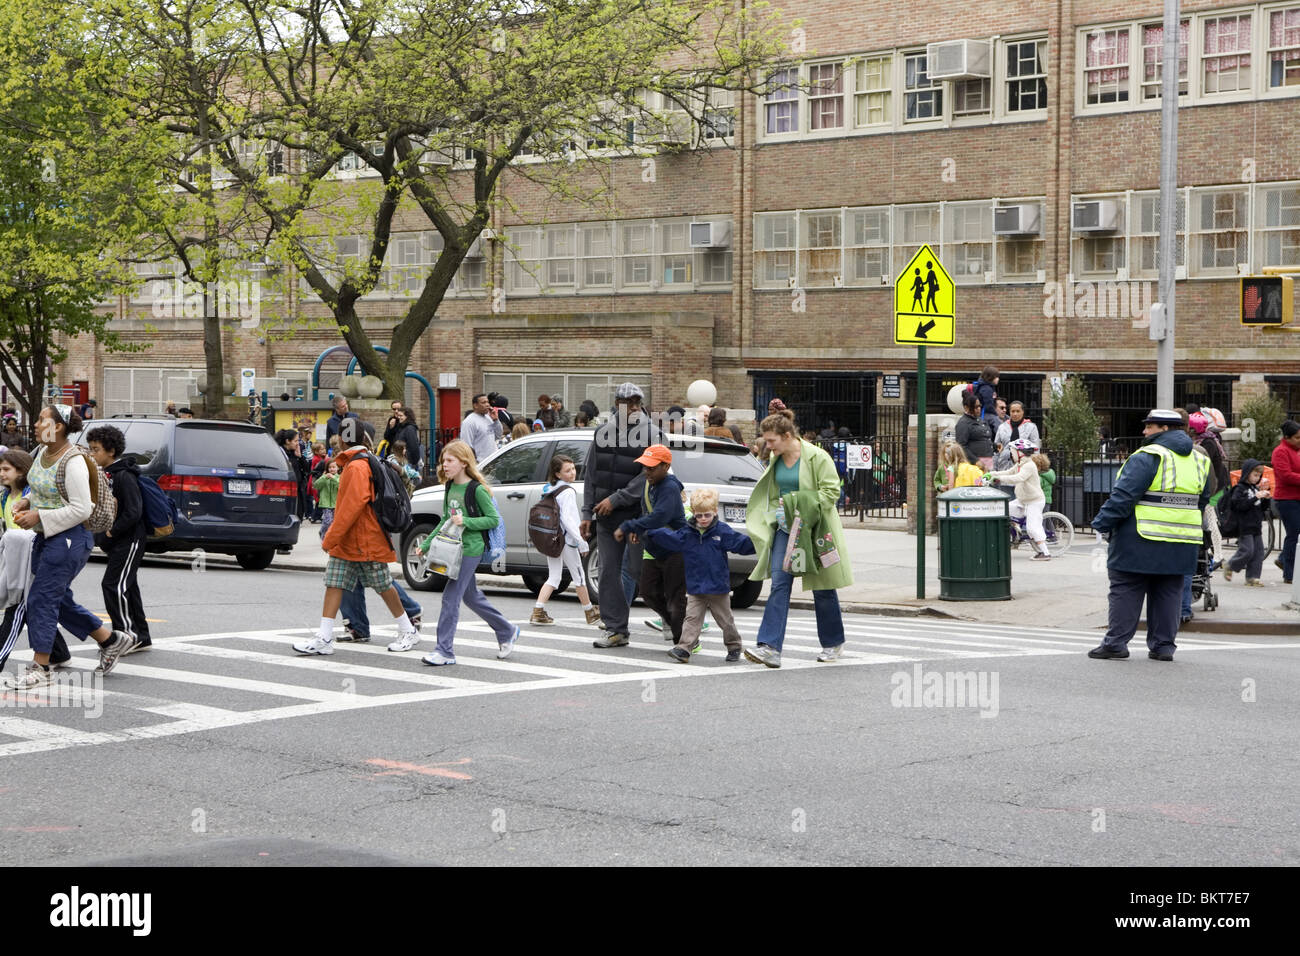 Children being picked up after school at PS 321 Elementary School  in the Park Slope neighborhood of Brooklyn, New York. Stock Photo